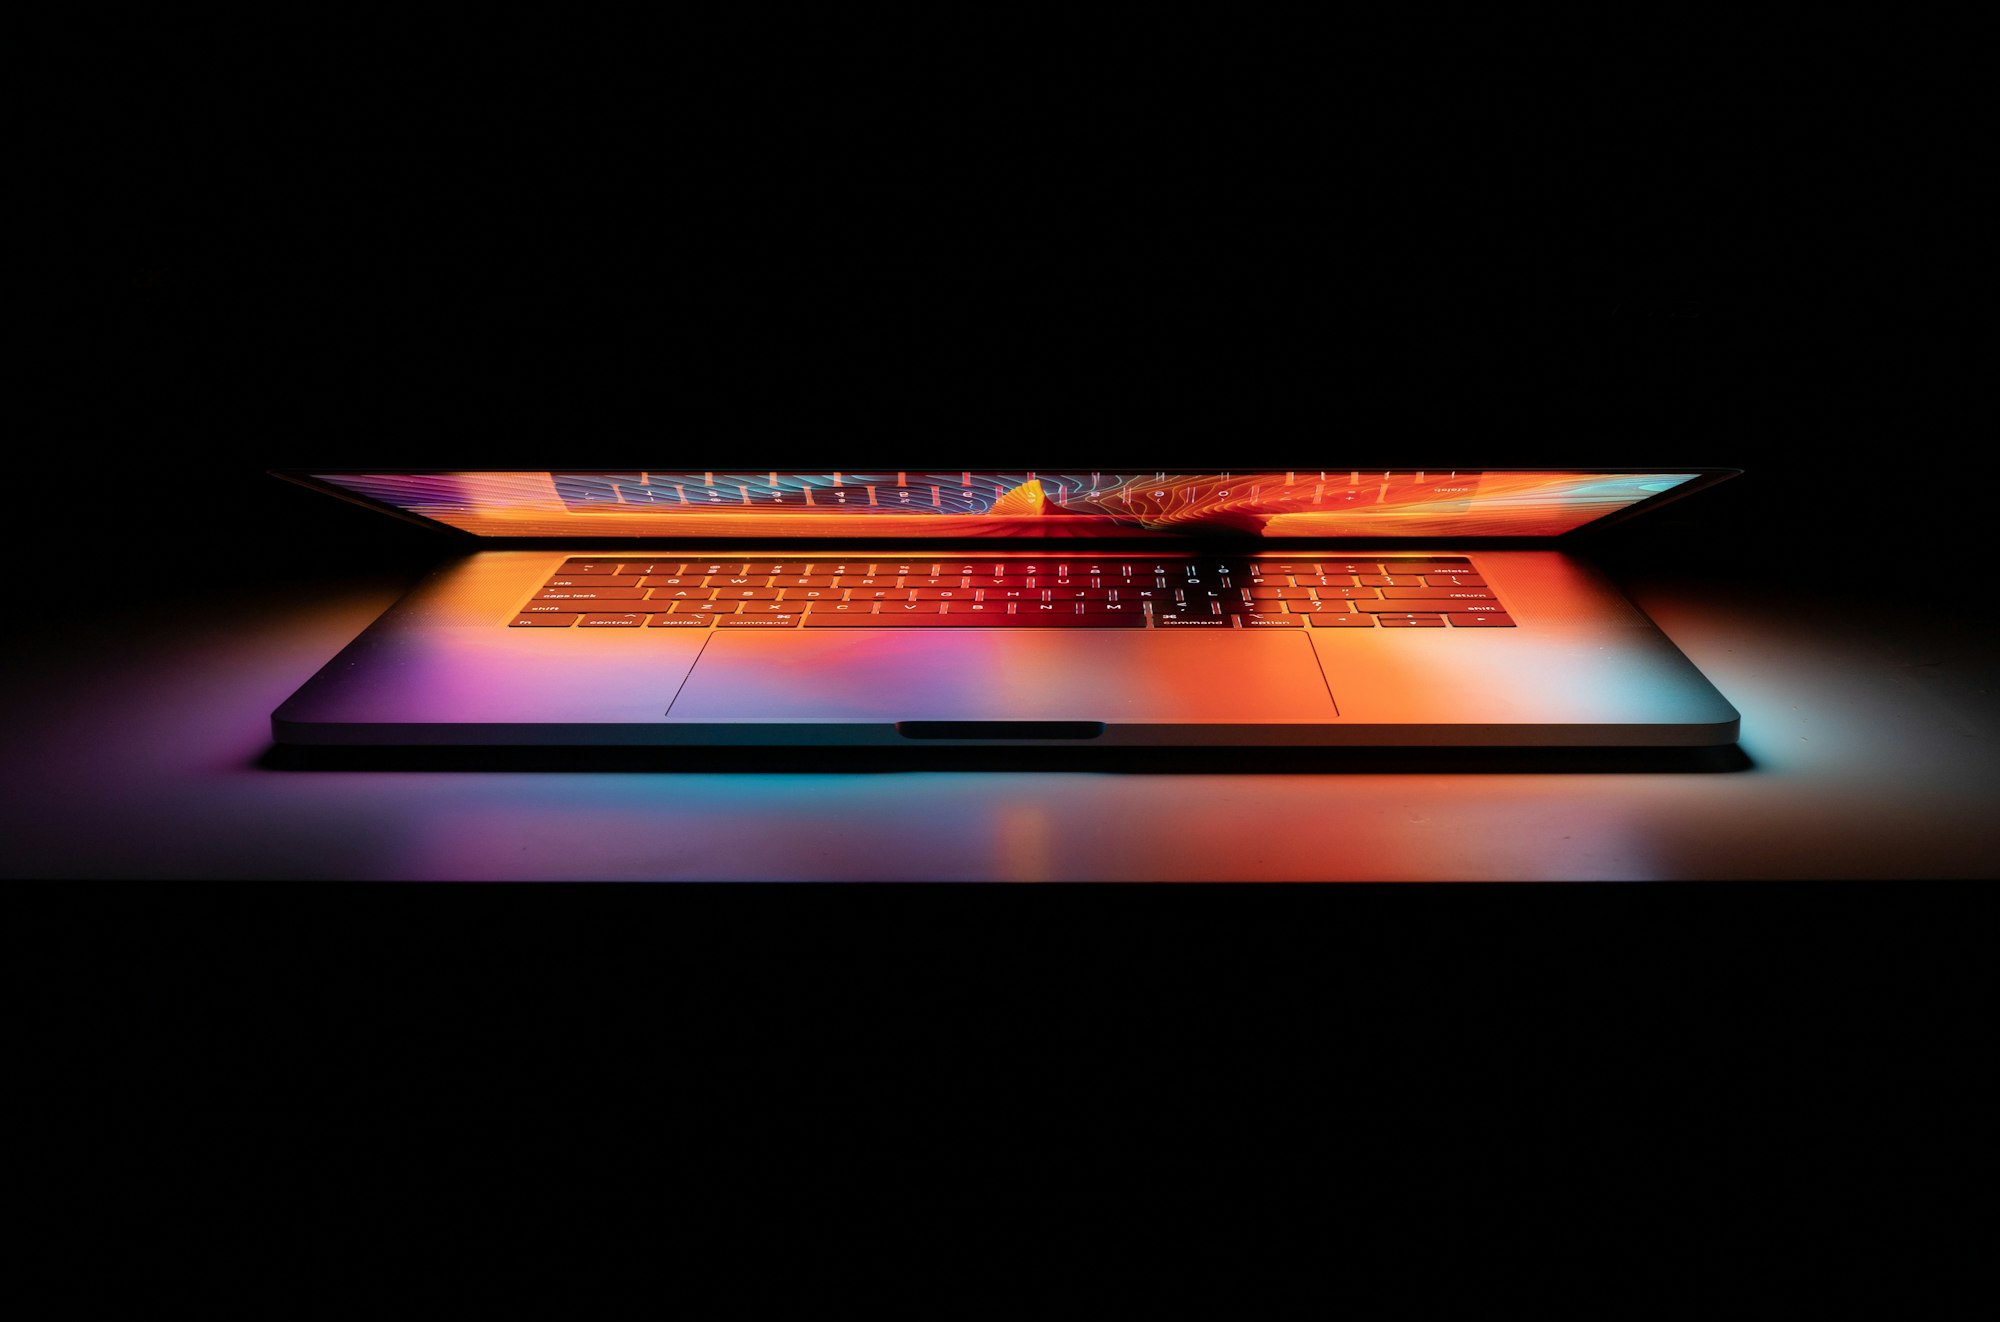 How to keep a MacBook awake with the lid closed